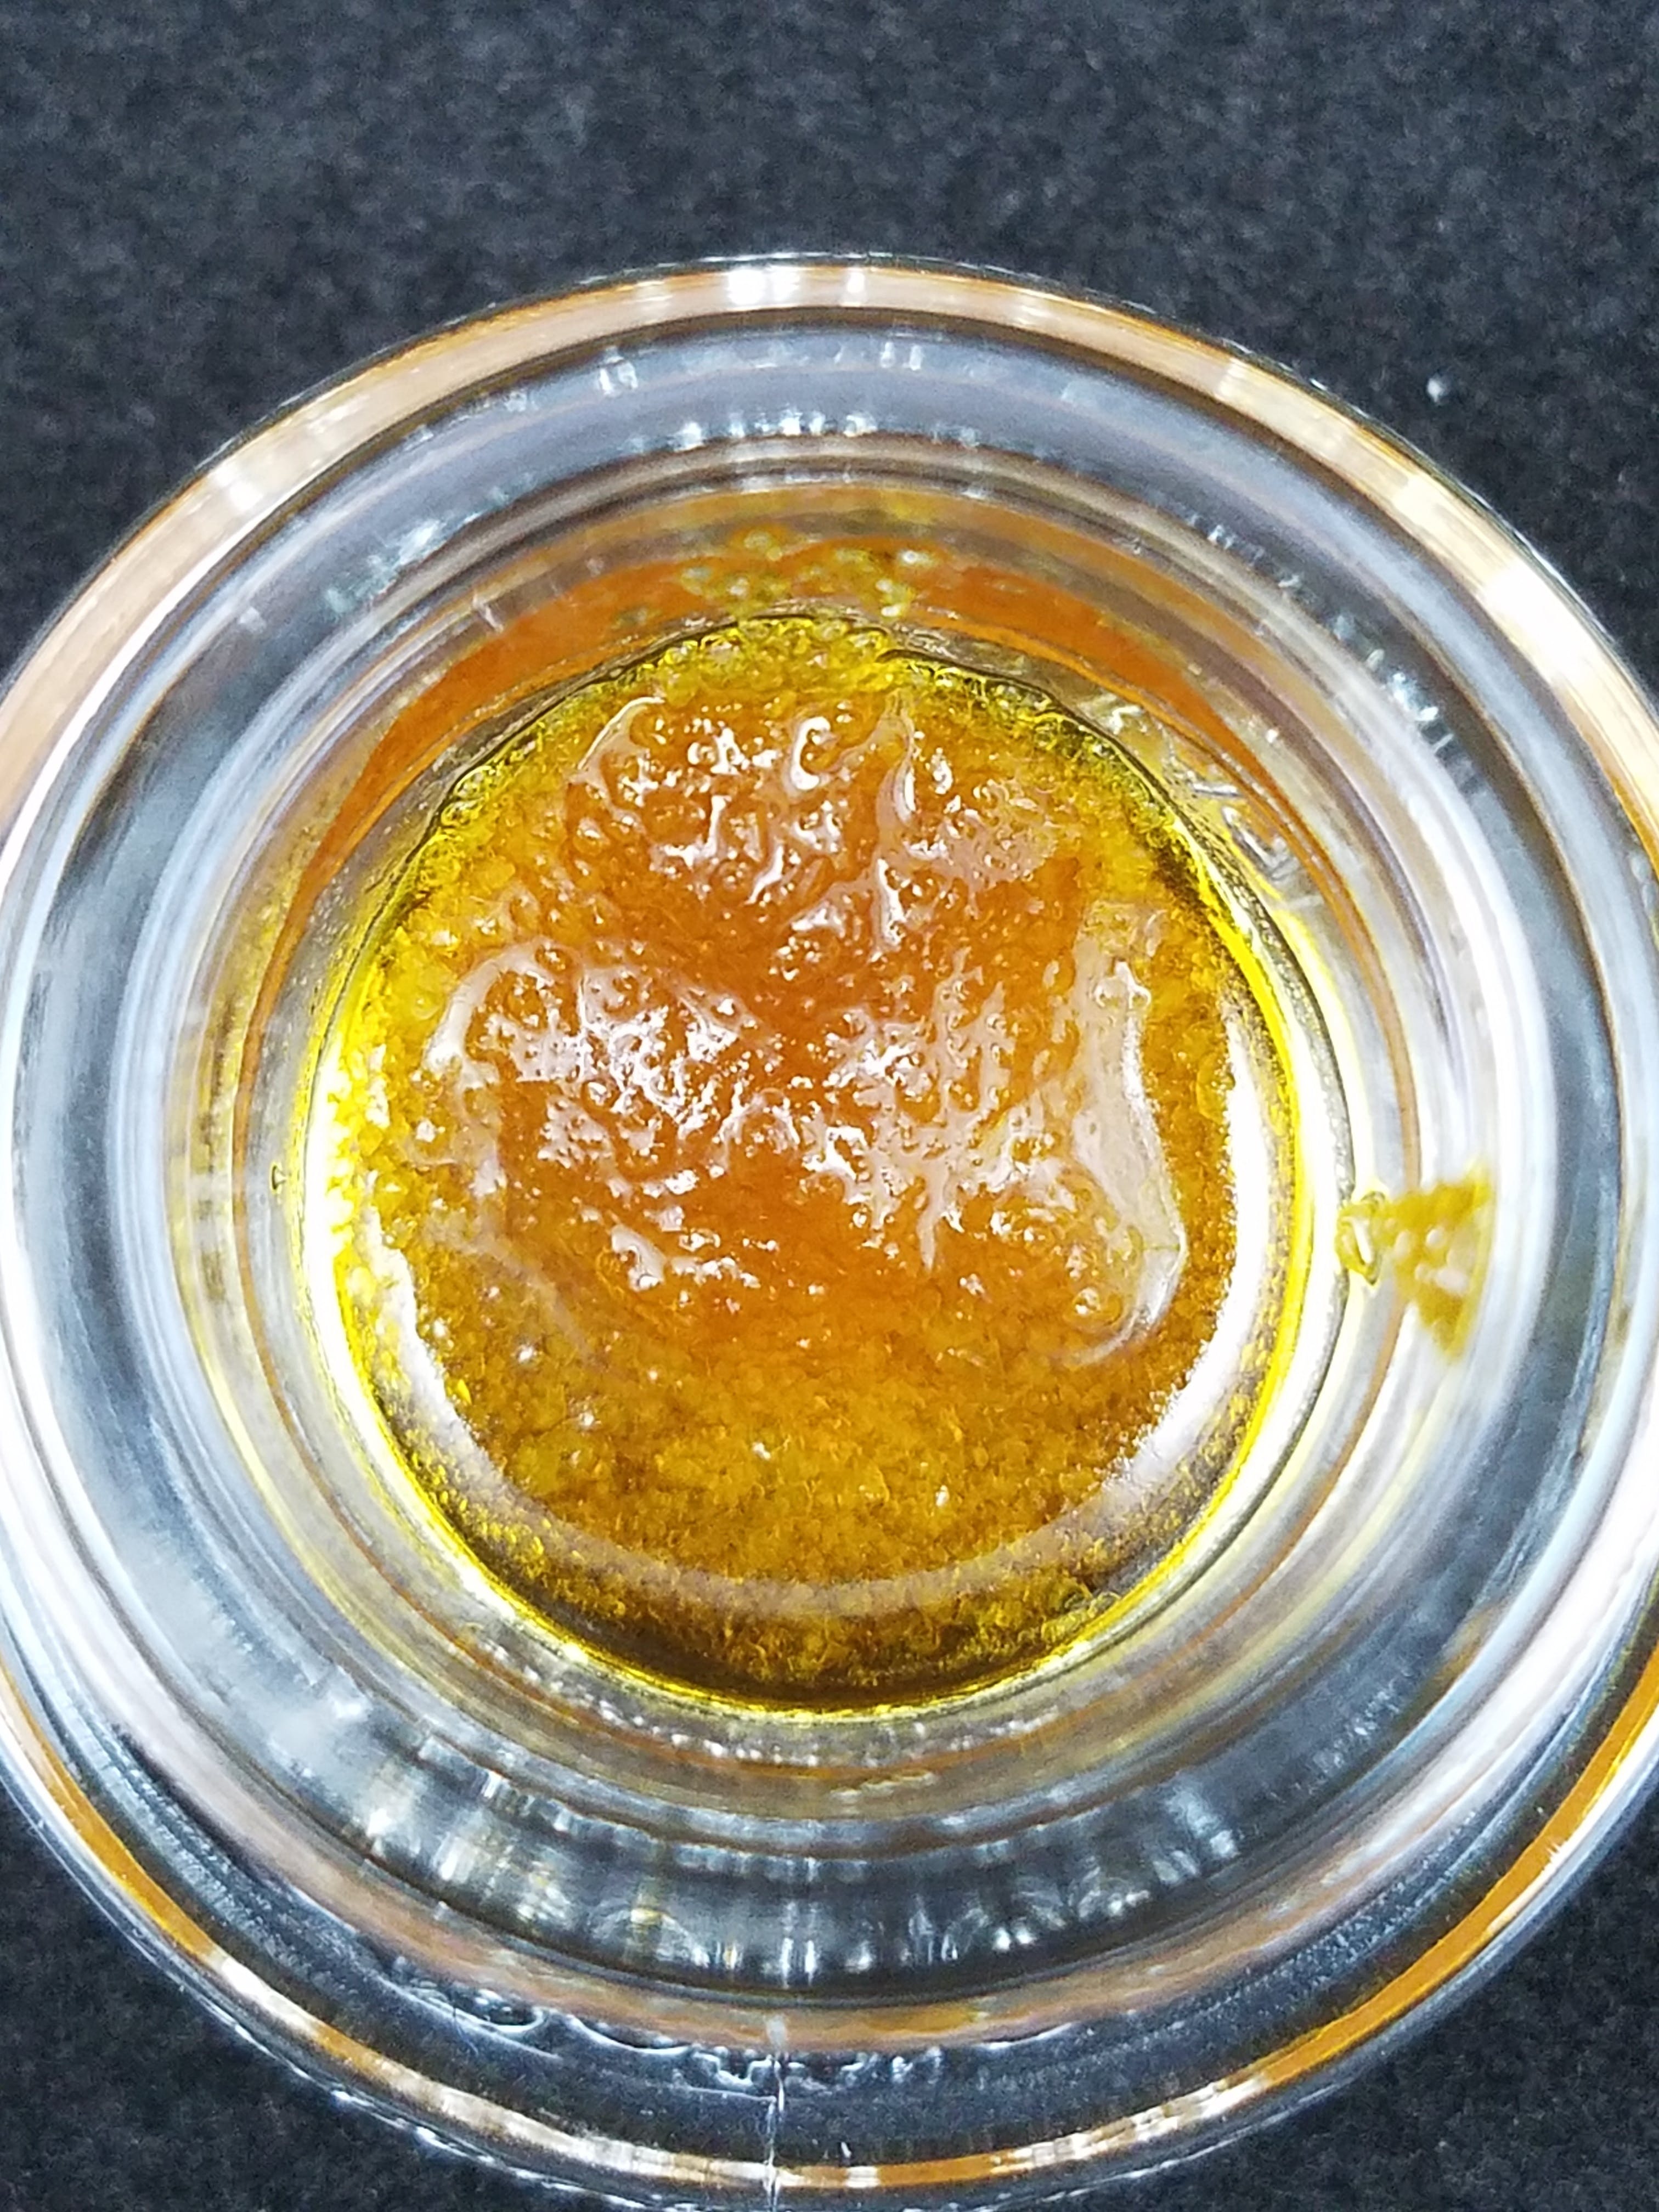 wax-apex-concentrates-triangle-kush-live-resin-sauce-1-gram